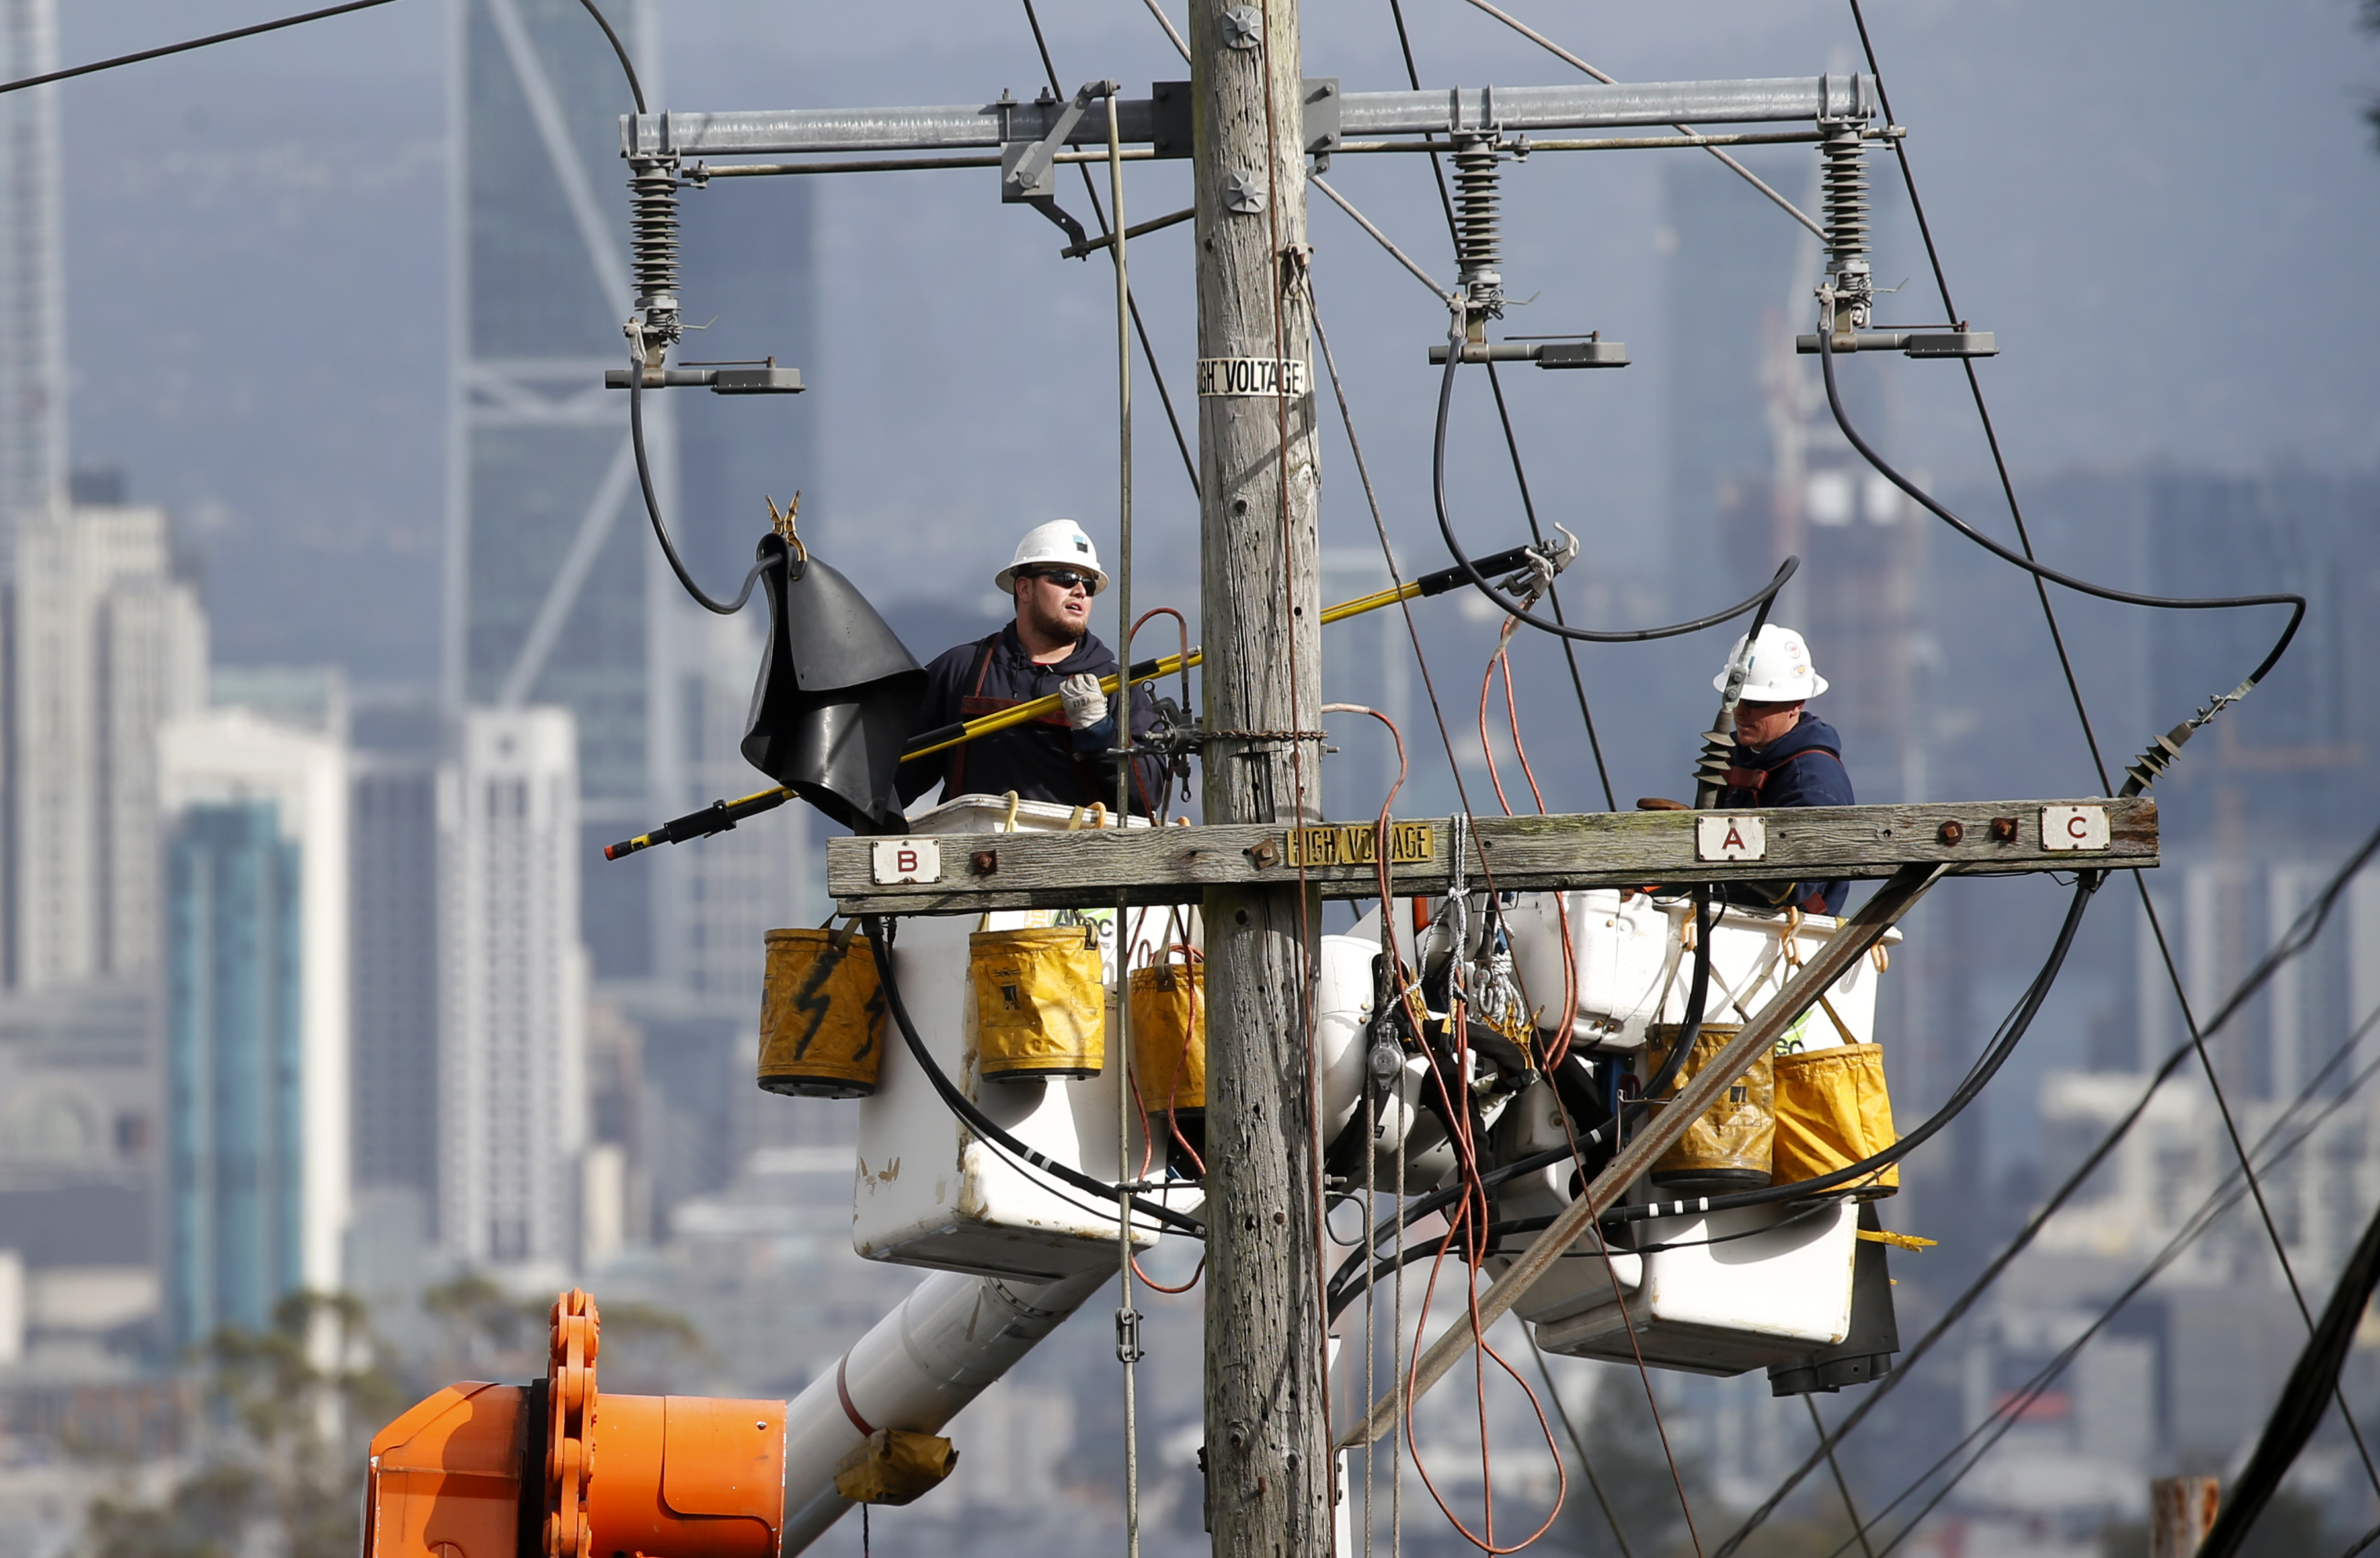 PG&E files for bankruptcy 